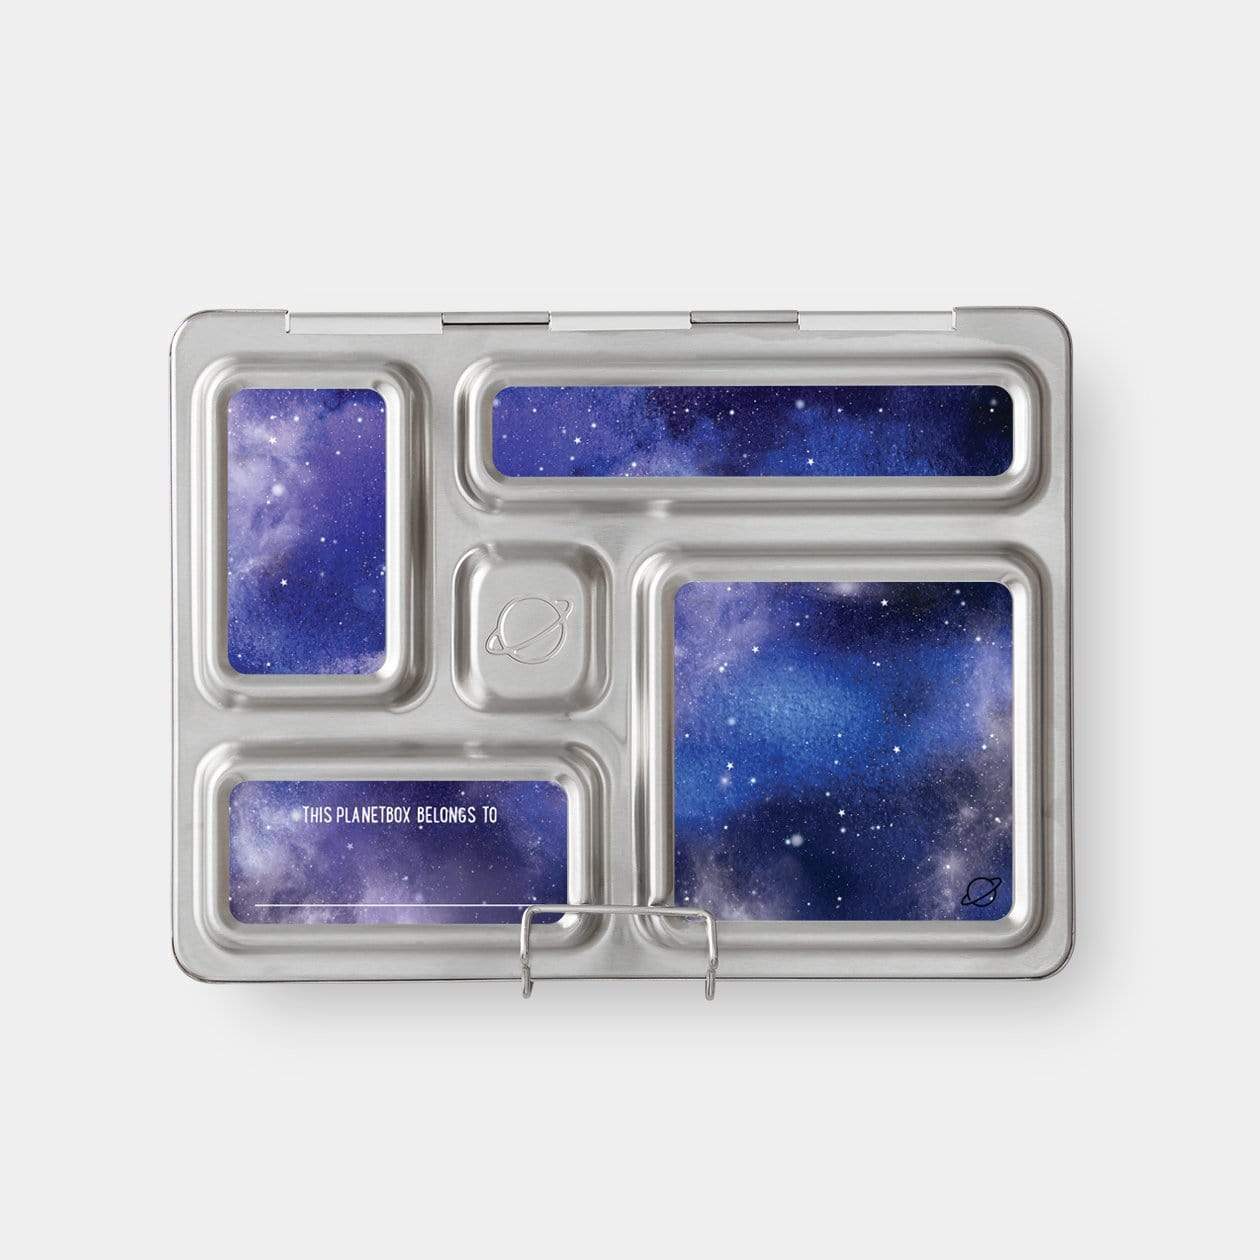 Planetbox Rover Lunch Box Kits (Box, Carry Bag, Containers, Magnets) Unicorn Magic / Stardust